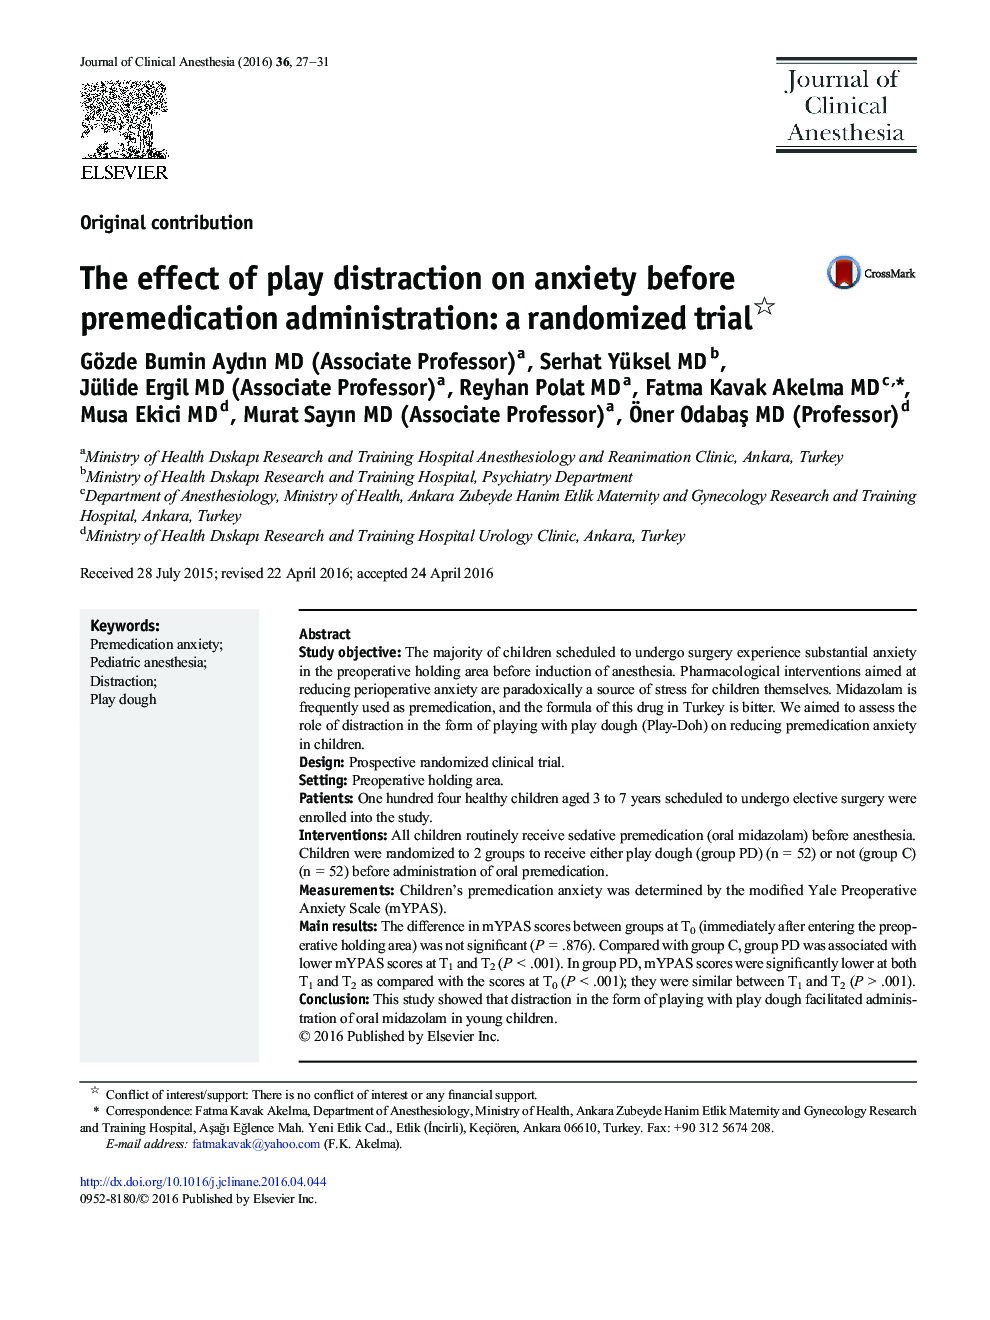 The effect of play distraction on anxiety before premedication administration: a randomized trial